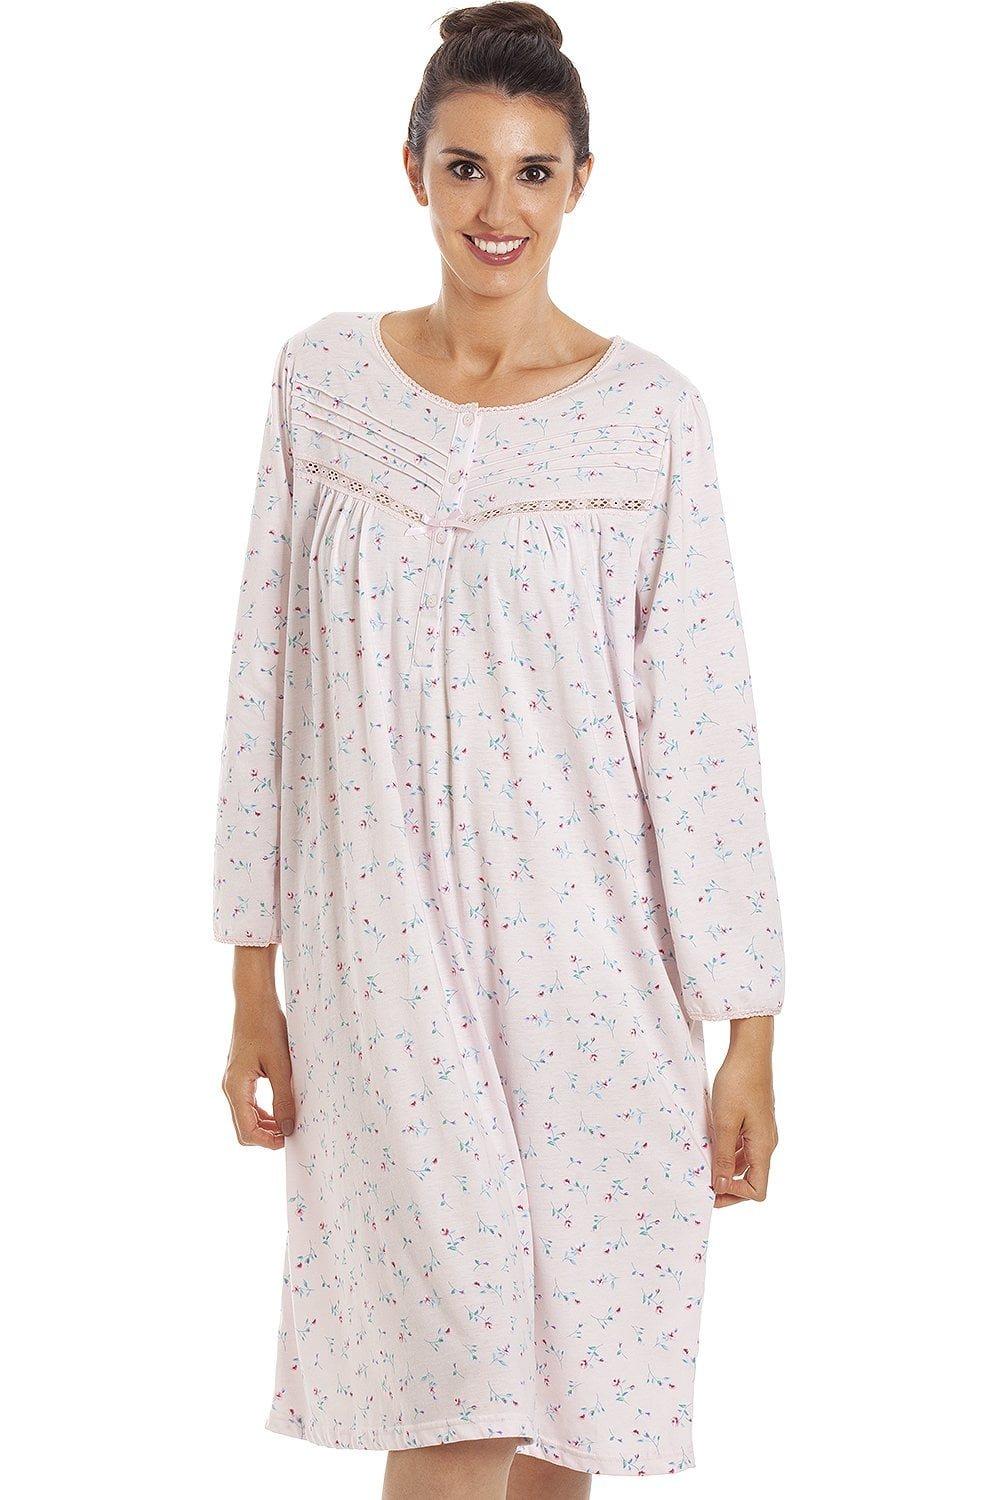 Classic Jersey Long Sleeve Floral Print Nightdress